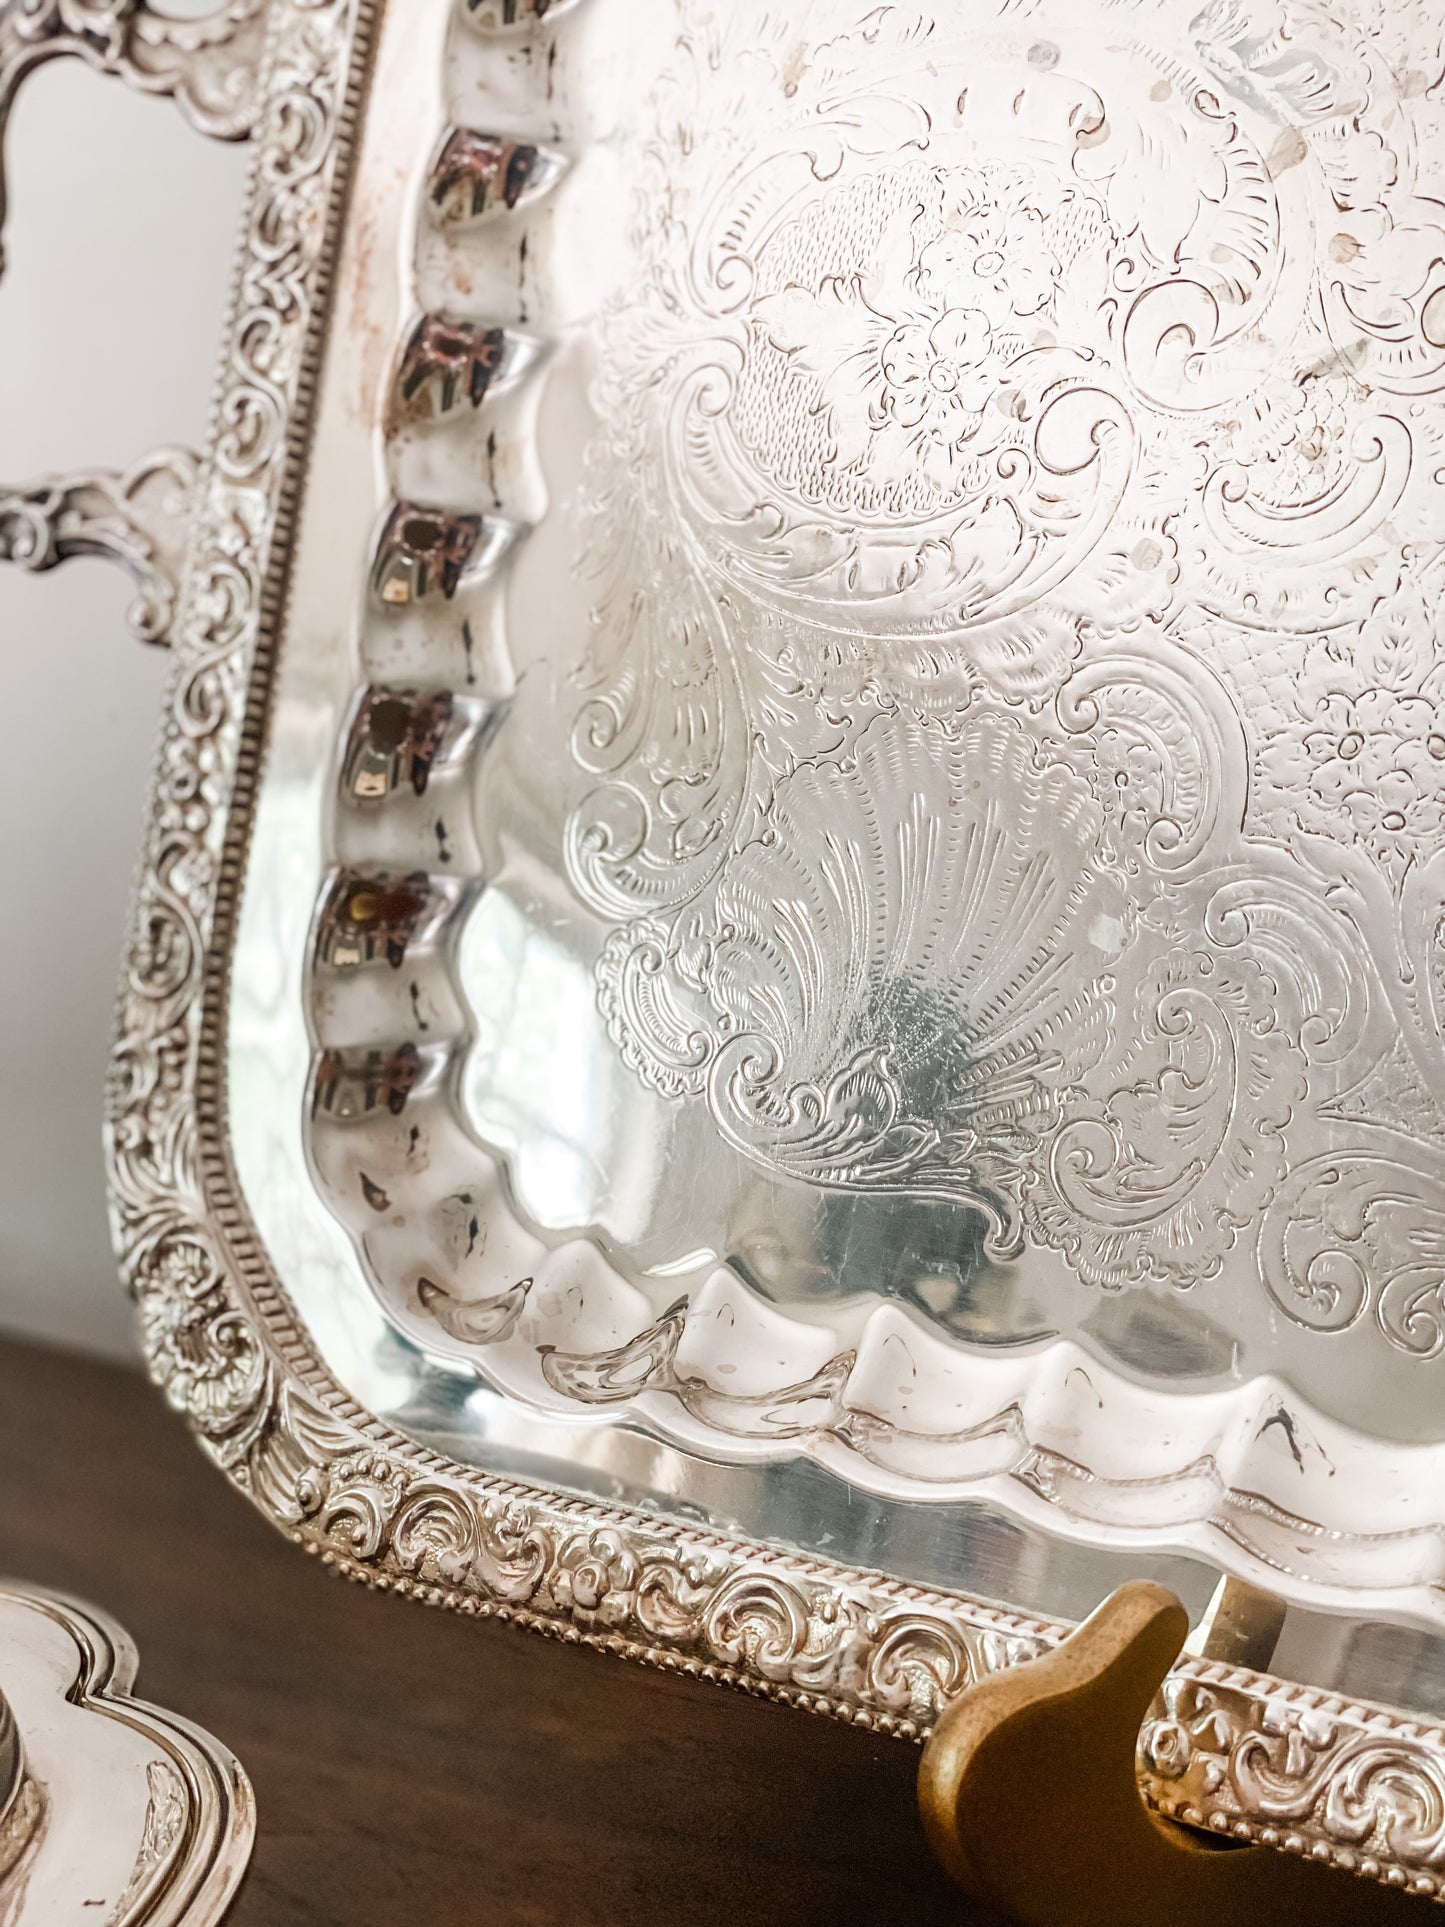 Gorgeous Large Handled Silver Tray